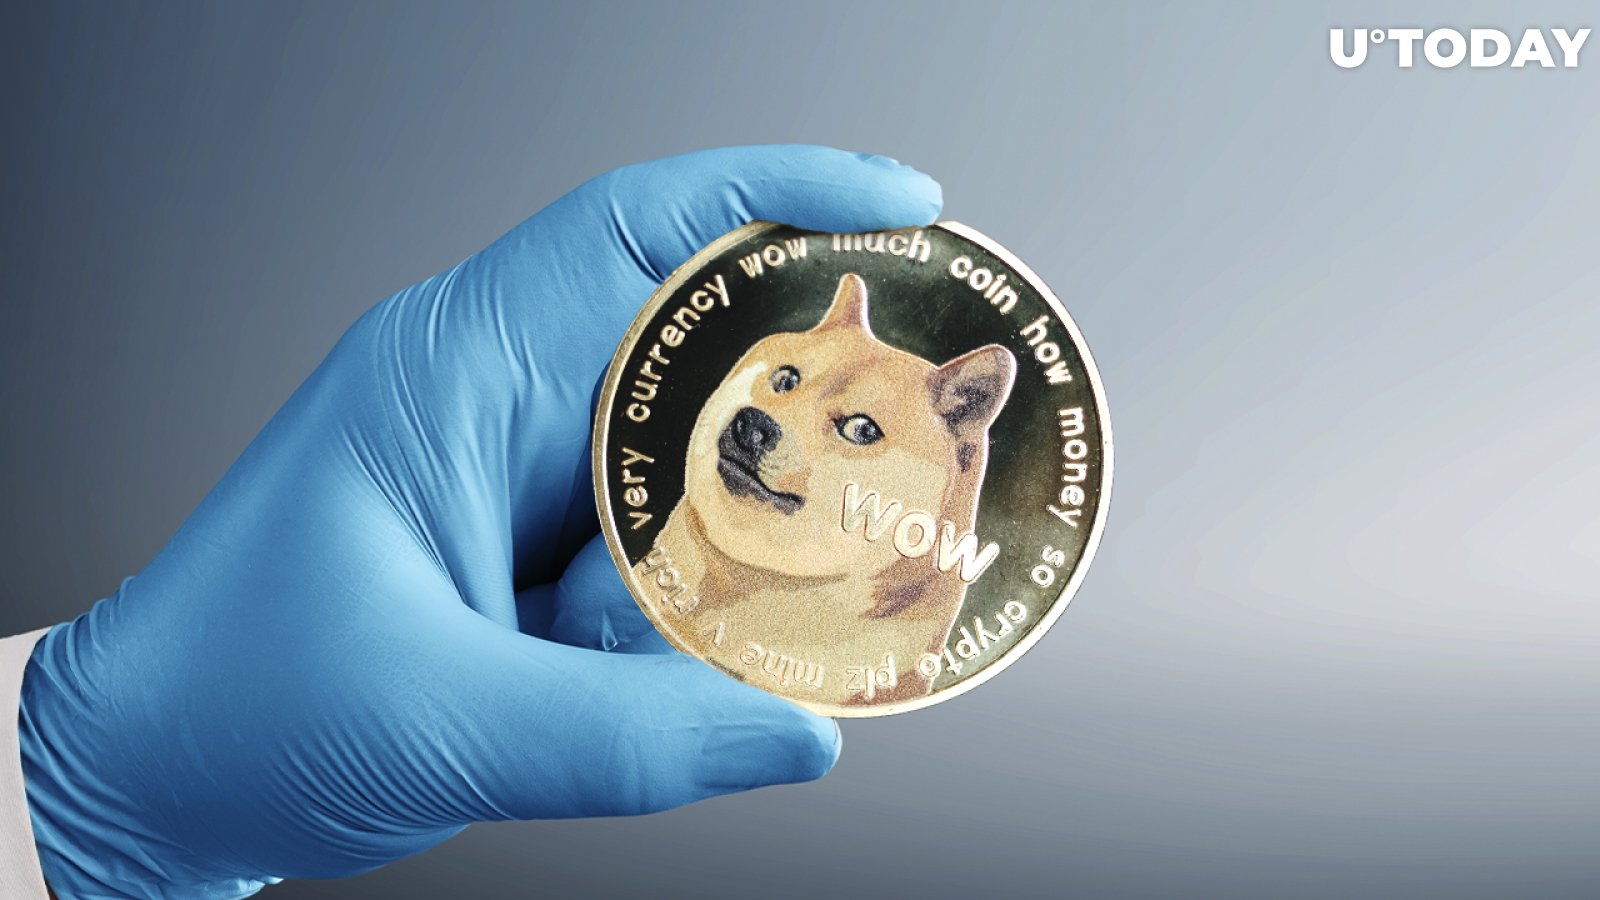 "Elon Musk" Dogecoin Scam Promoted by Hacked Twitter Account of Indian Medical Association